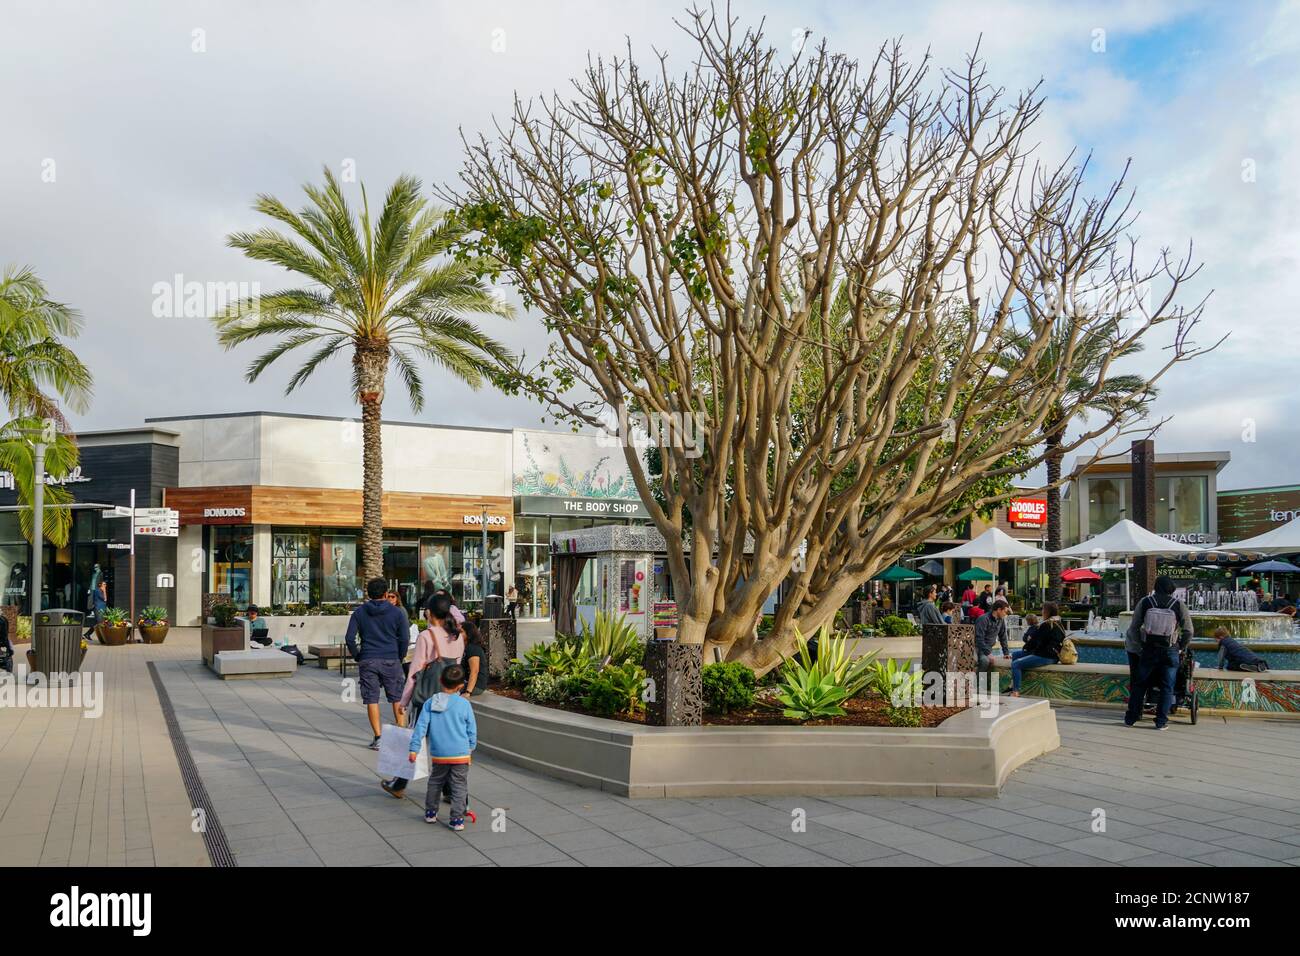 UTC Westfield Shopping Mall at University Town Centre .Outdoor shopping center with upmarket chain retailers, a movie theater, restaurants. .La Jolla, San Diego, California, USA. March 23rd, 2019 Stock Photo